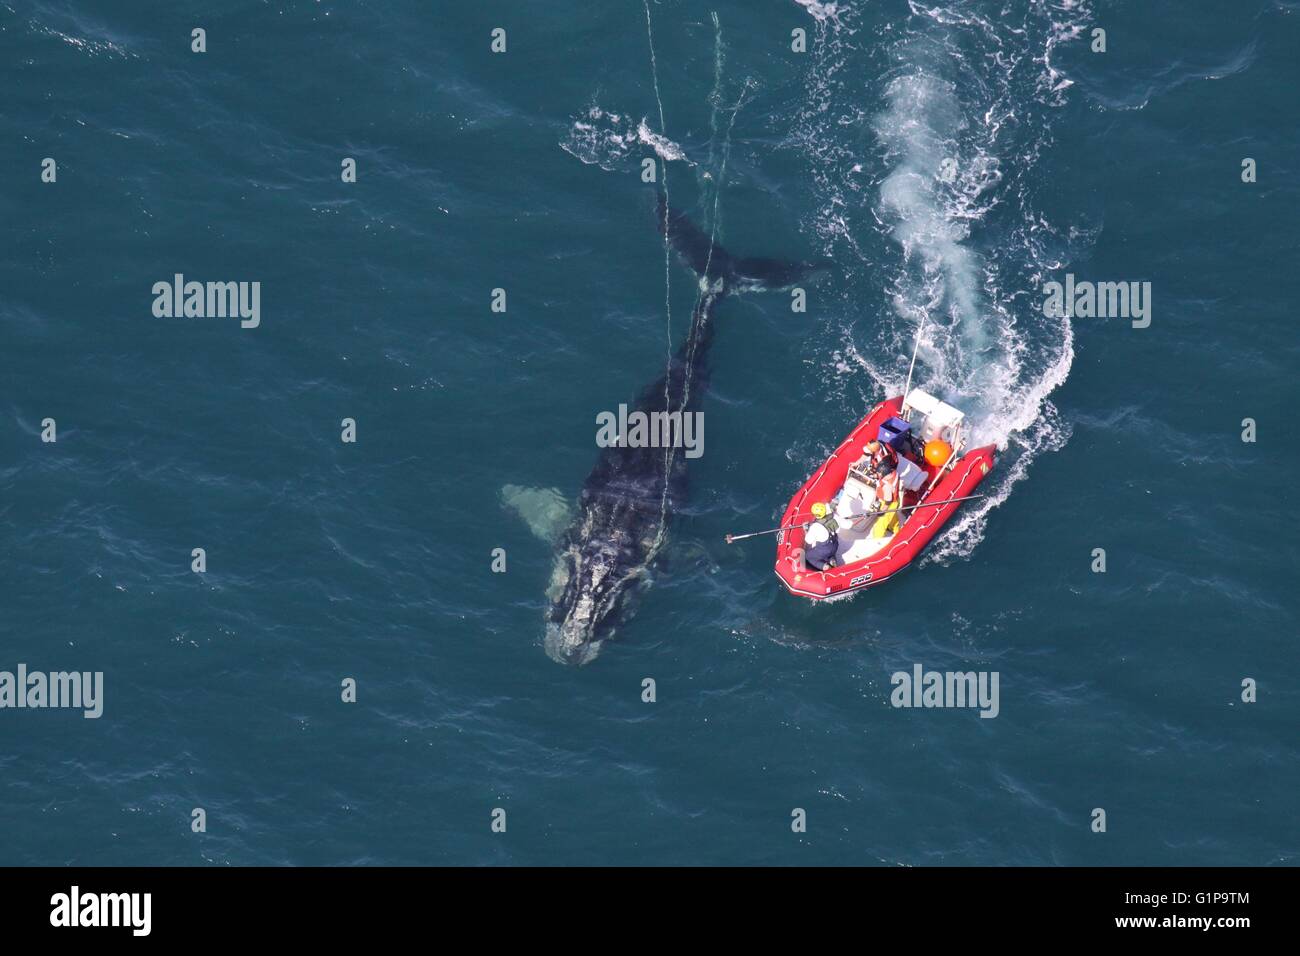 Scientists from NOAA Fisheries Service approach a young North Atlantic right whale to disentangle it from a fishing net around her head January 15, 2011 off the coast off Cape Canaveral, Florida. The right whale is among the most endangered whales in the world. Stock Photo